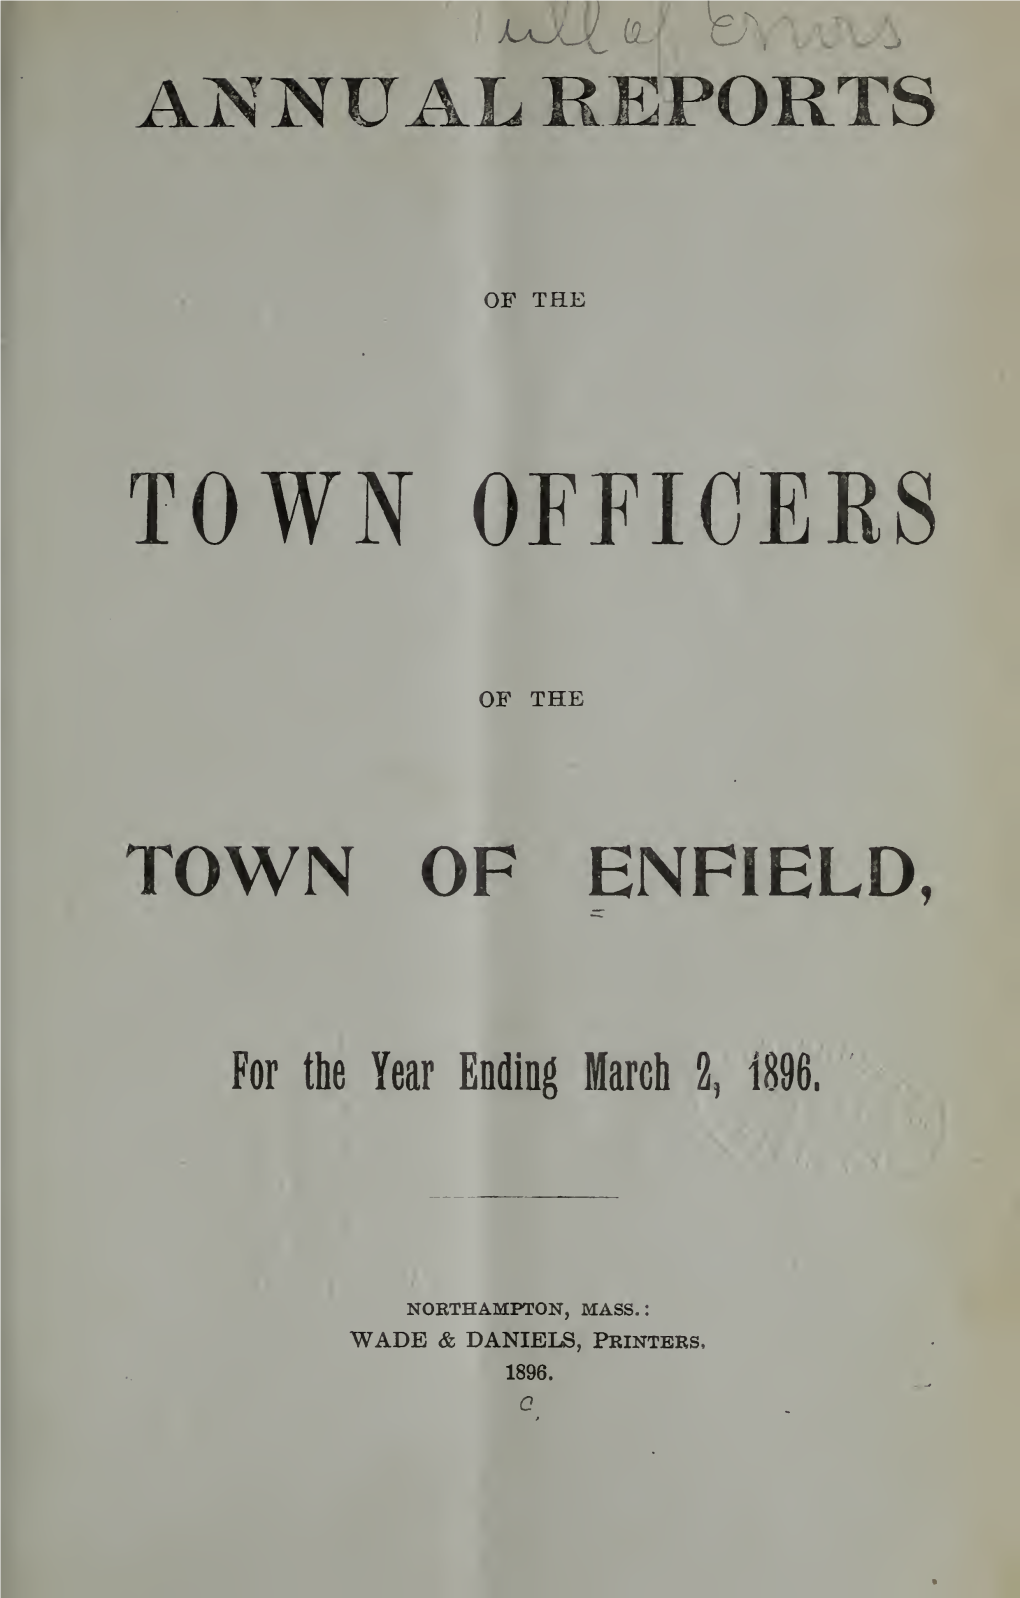 Annual Reports of the Town Officers of the Town of Enfield, Massachusetts